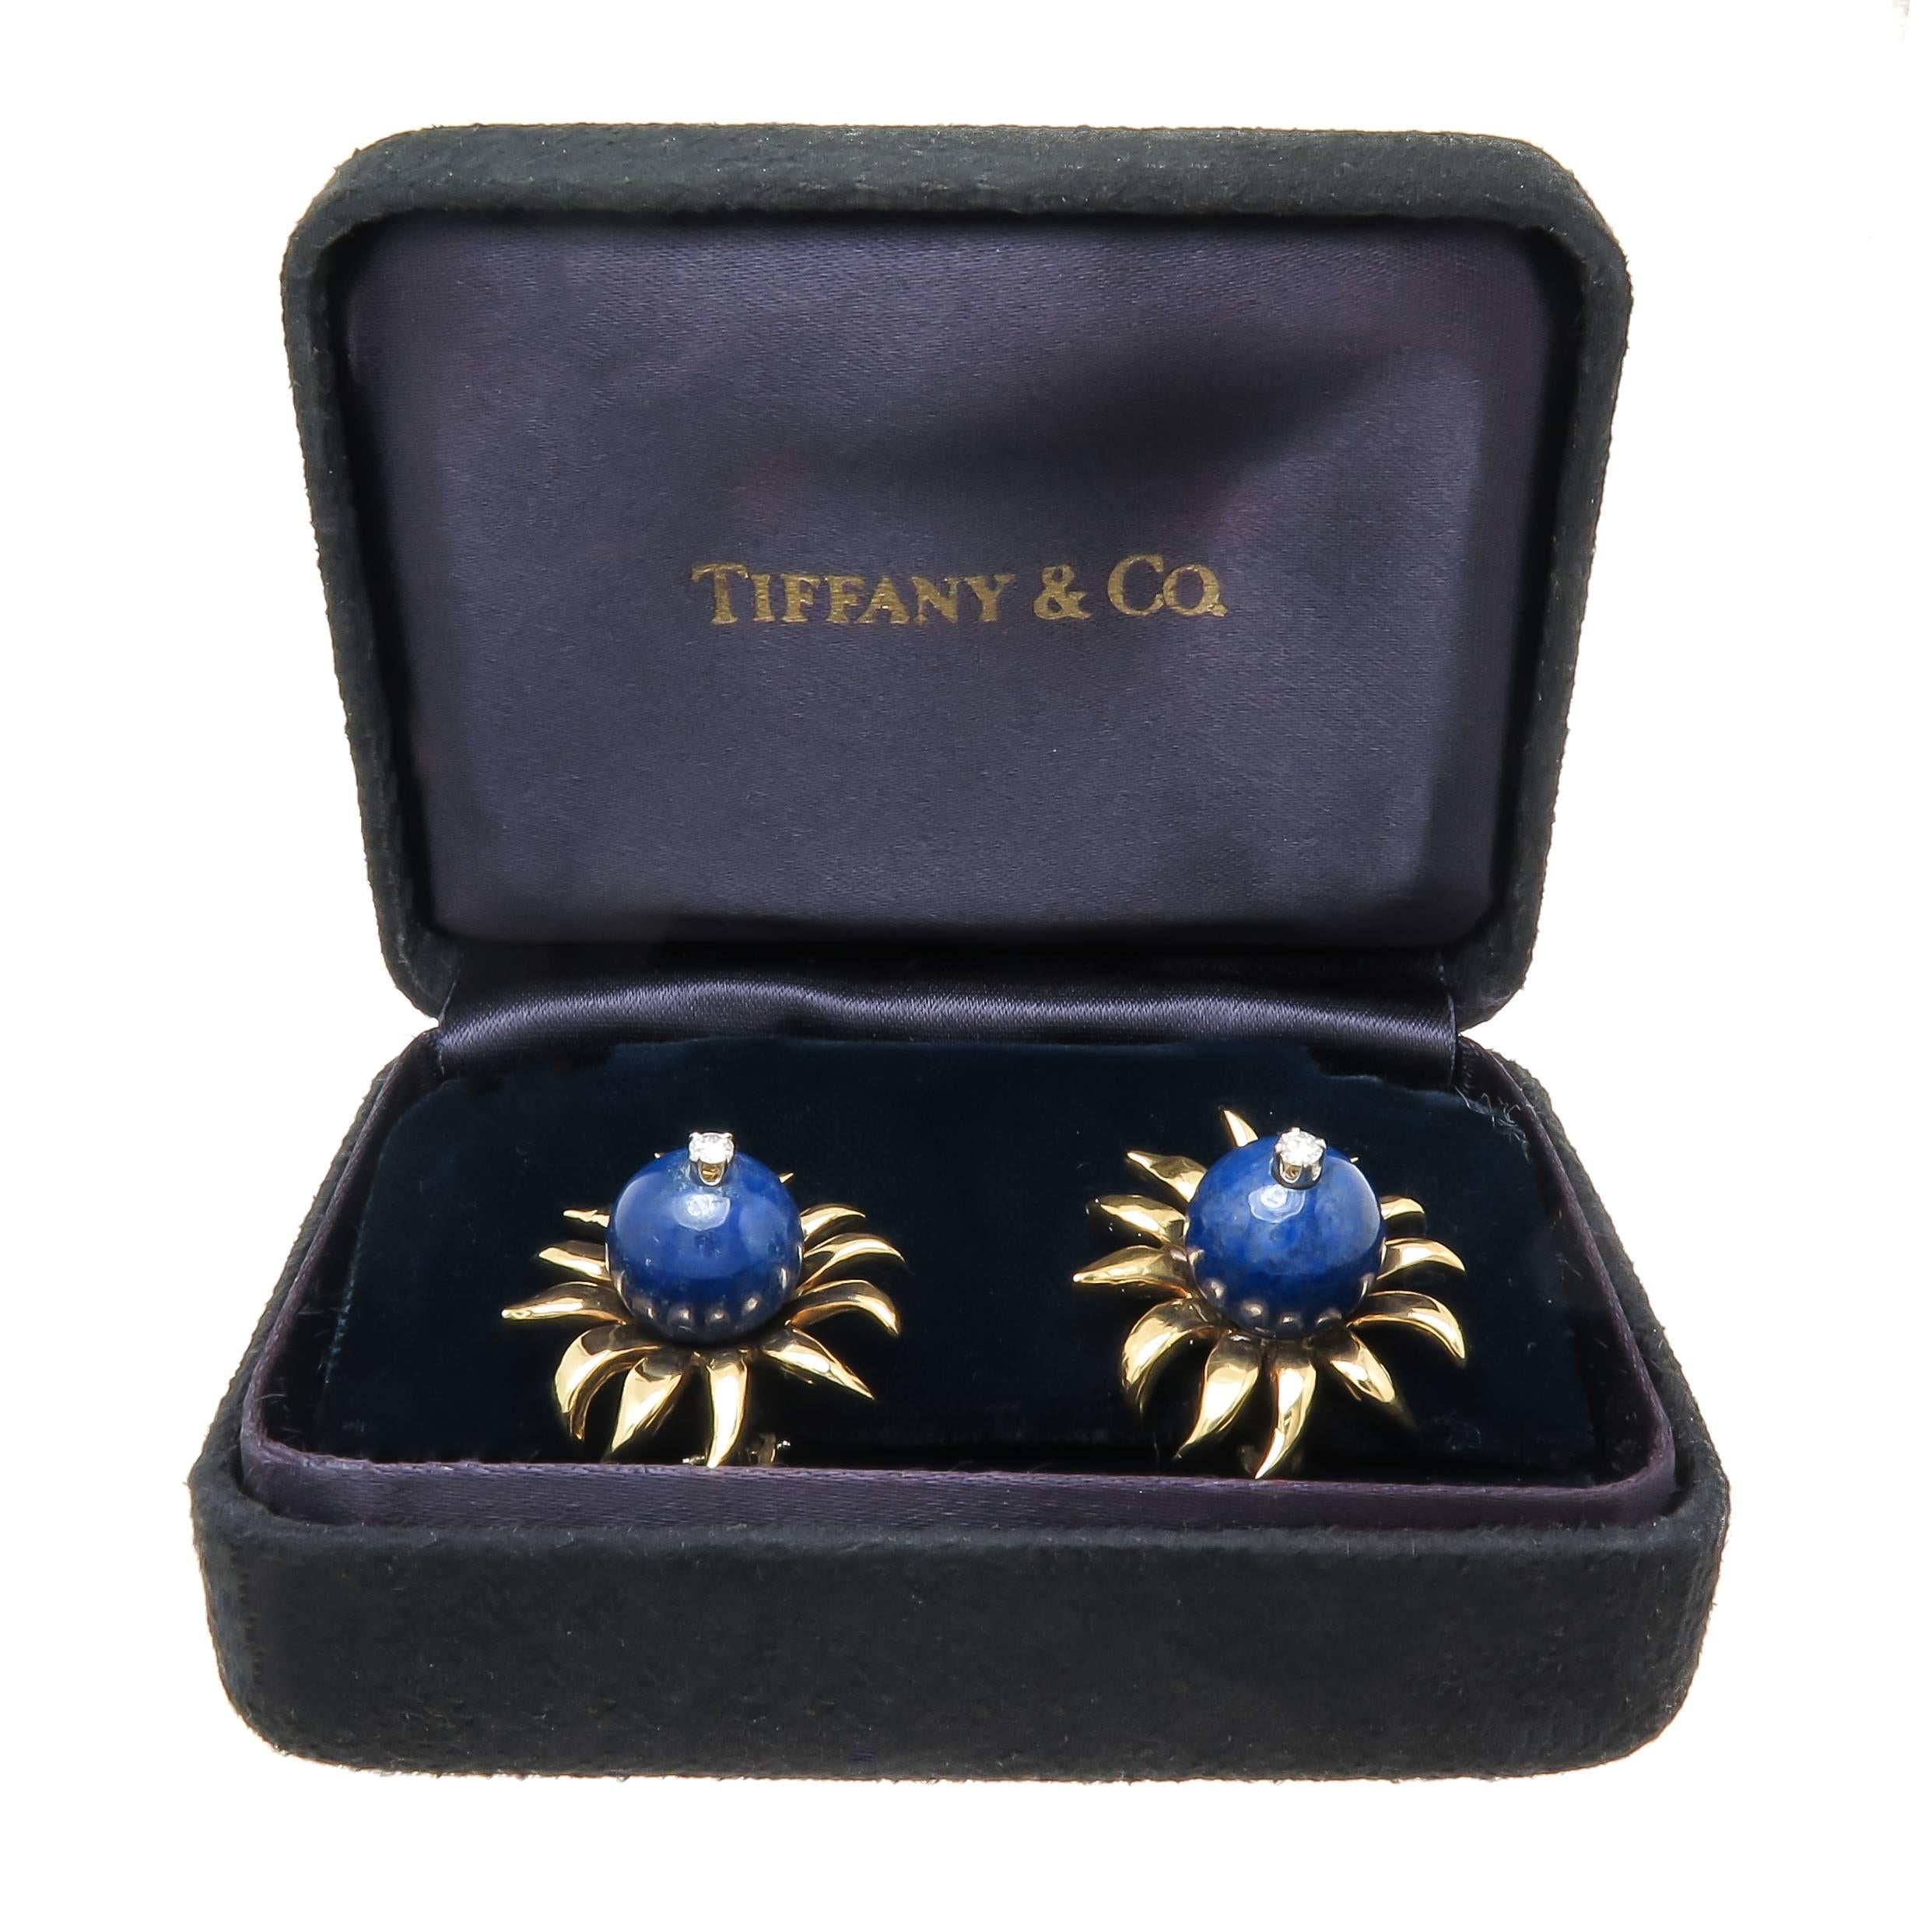 Circa 1980s jean Schlumberger for Tiffany & Company 18k yellow Gold Earrings measuring 7/8 inch in diameter and centrally set with a Lapis lazuli measuring 11 MM and further set with a .05 Carat Diamond. having Omega Clip backs to which a Post